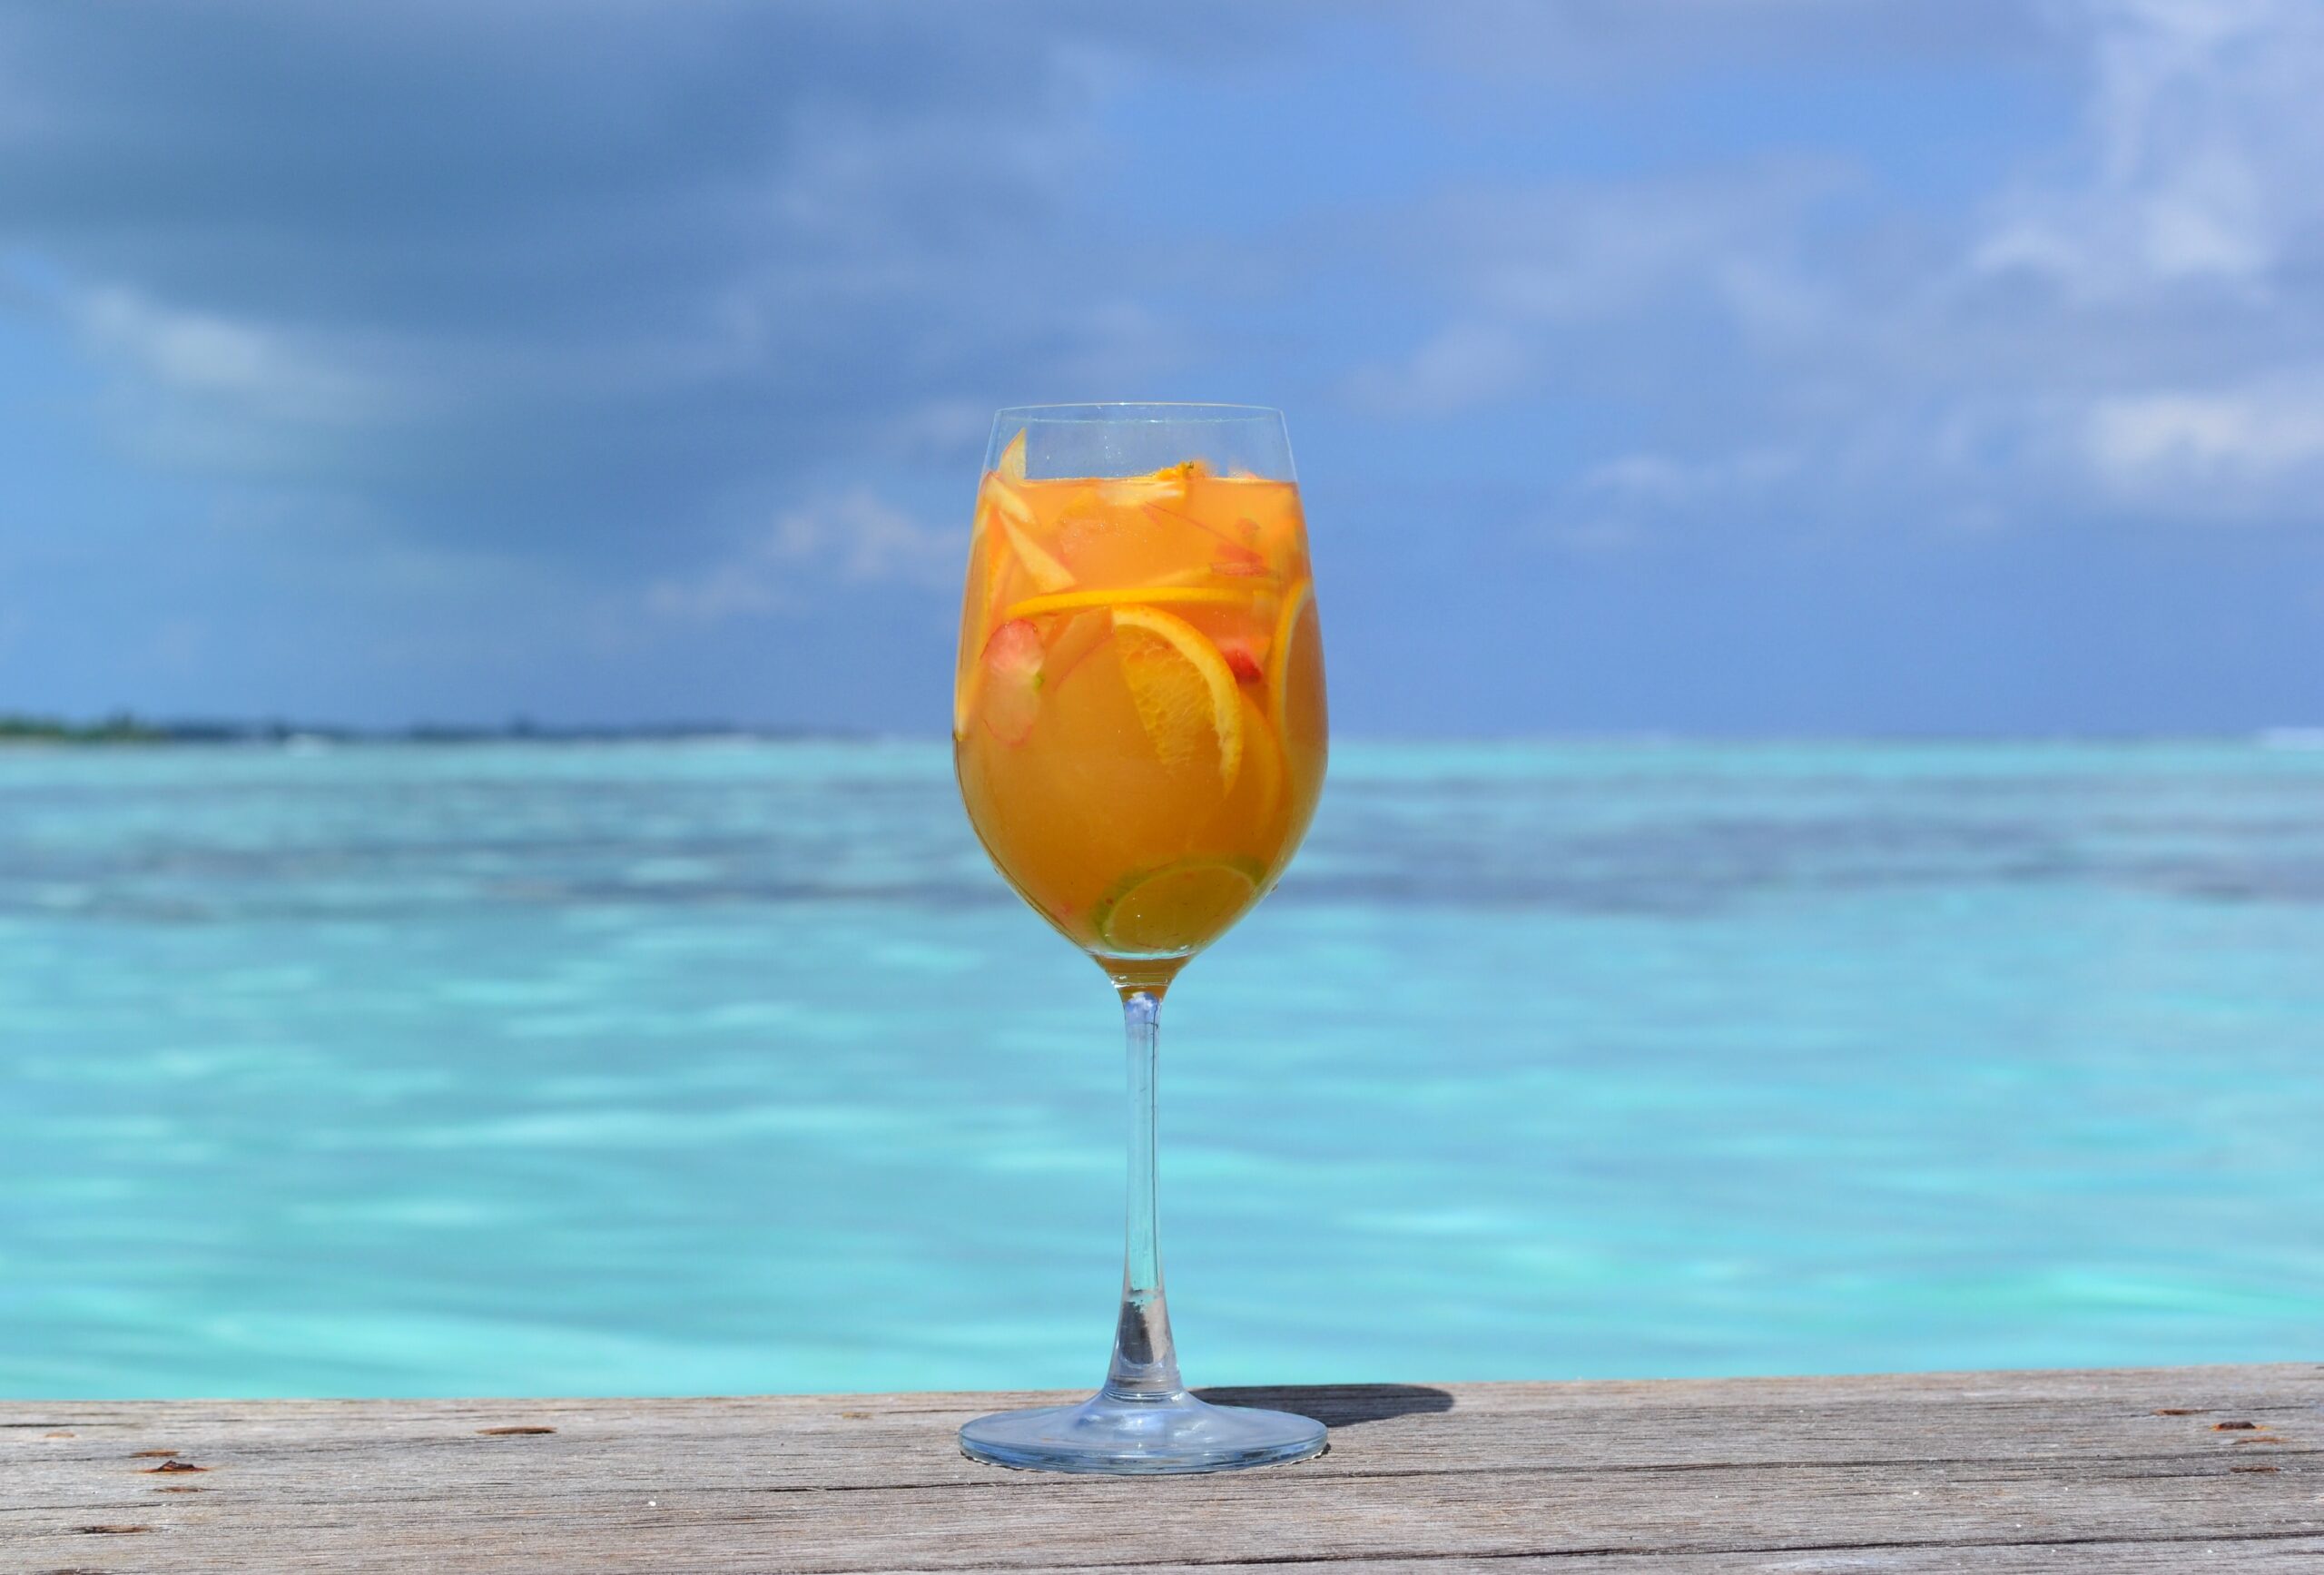 Chillax With A Classic Caribbean Cocktail – Try Tribe’s CBD Bahama Mama